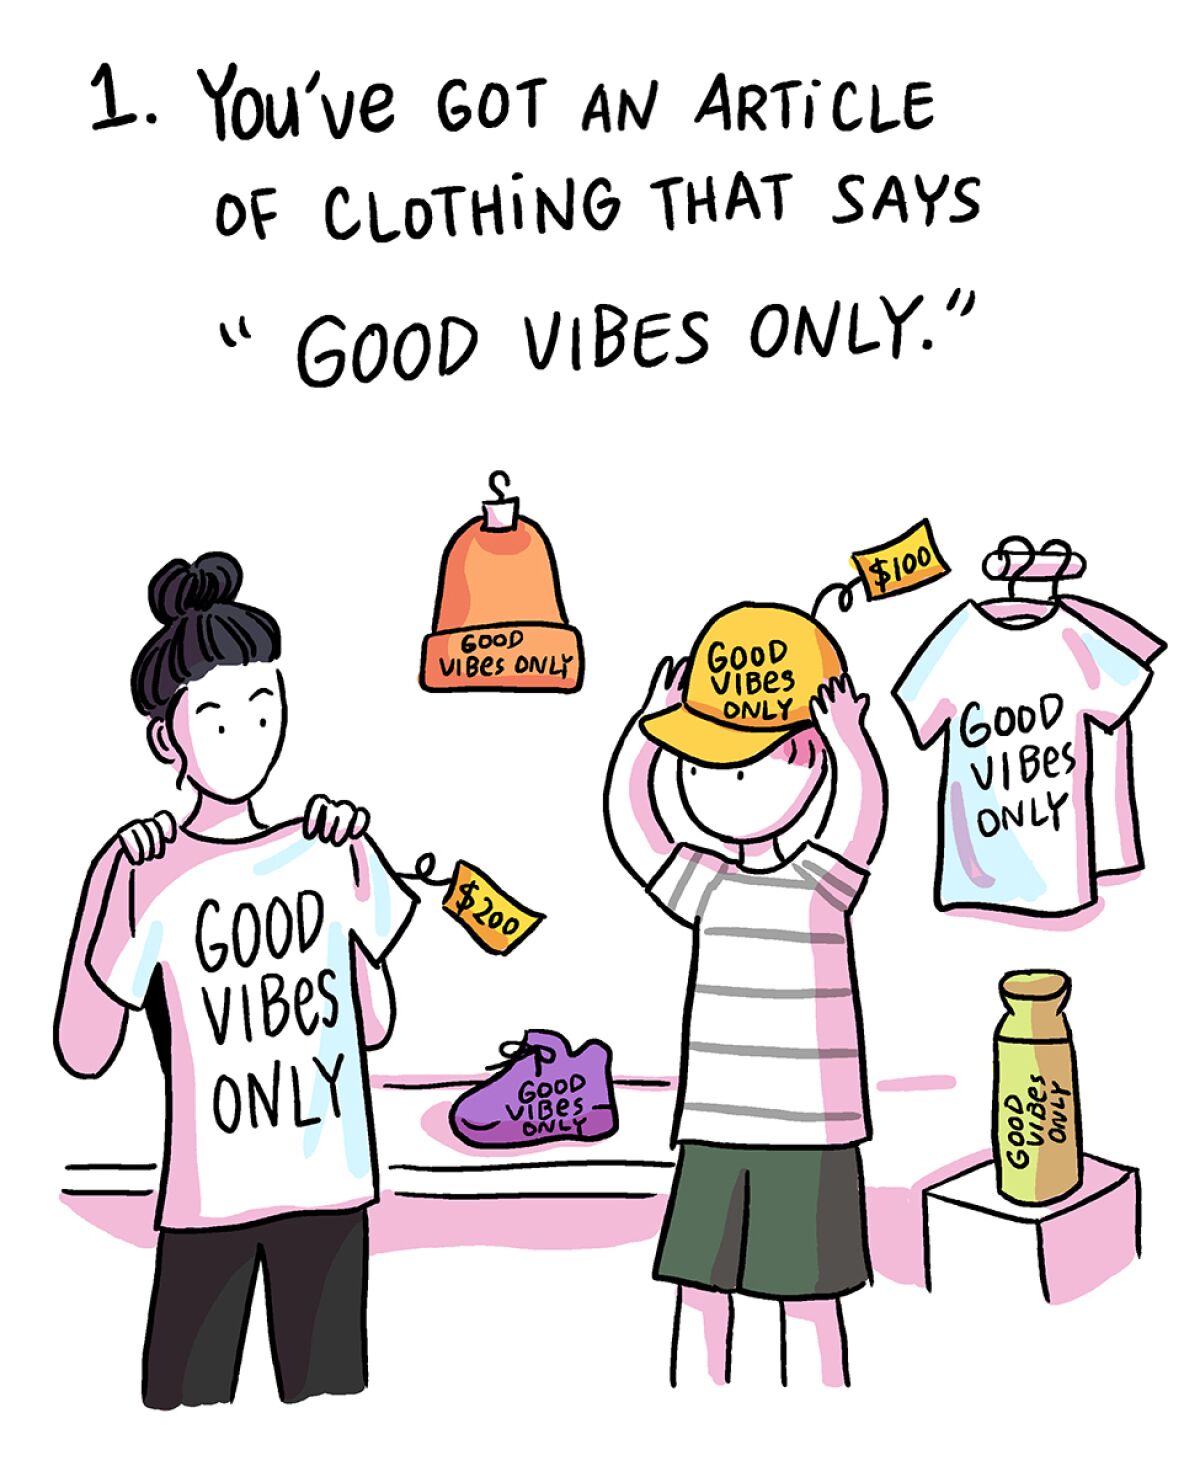 "1. You've got an article of clothing that says 'Good Vibes Only'" text with a drawing of two people in a clothing store